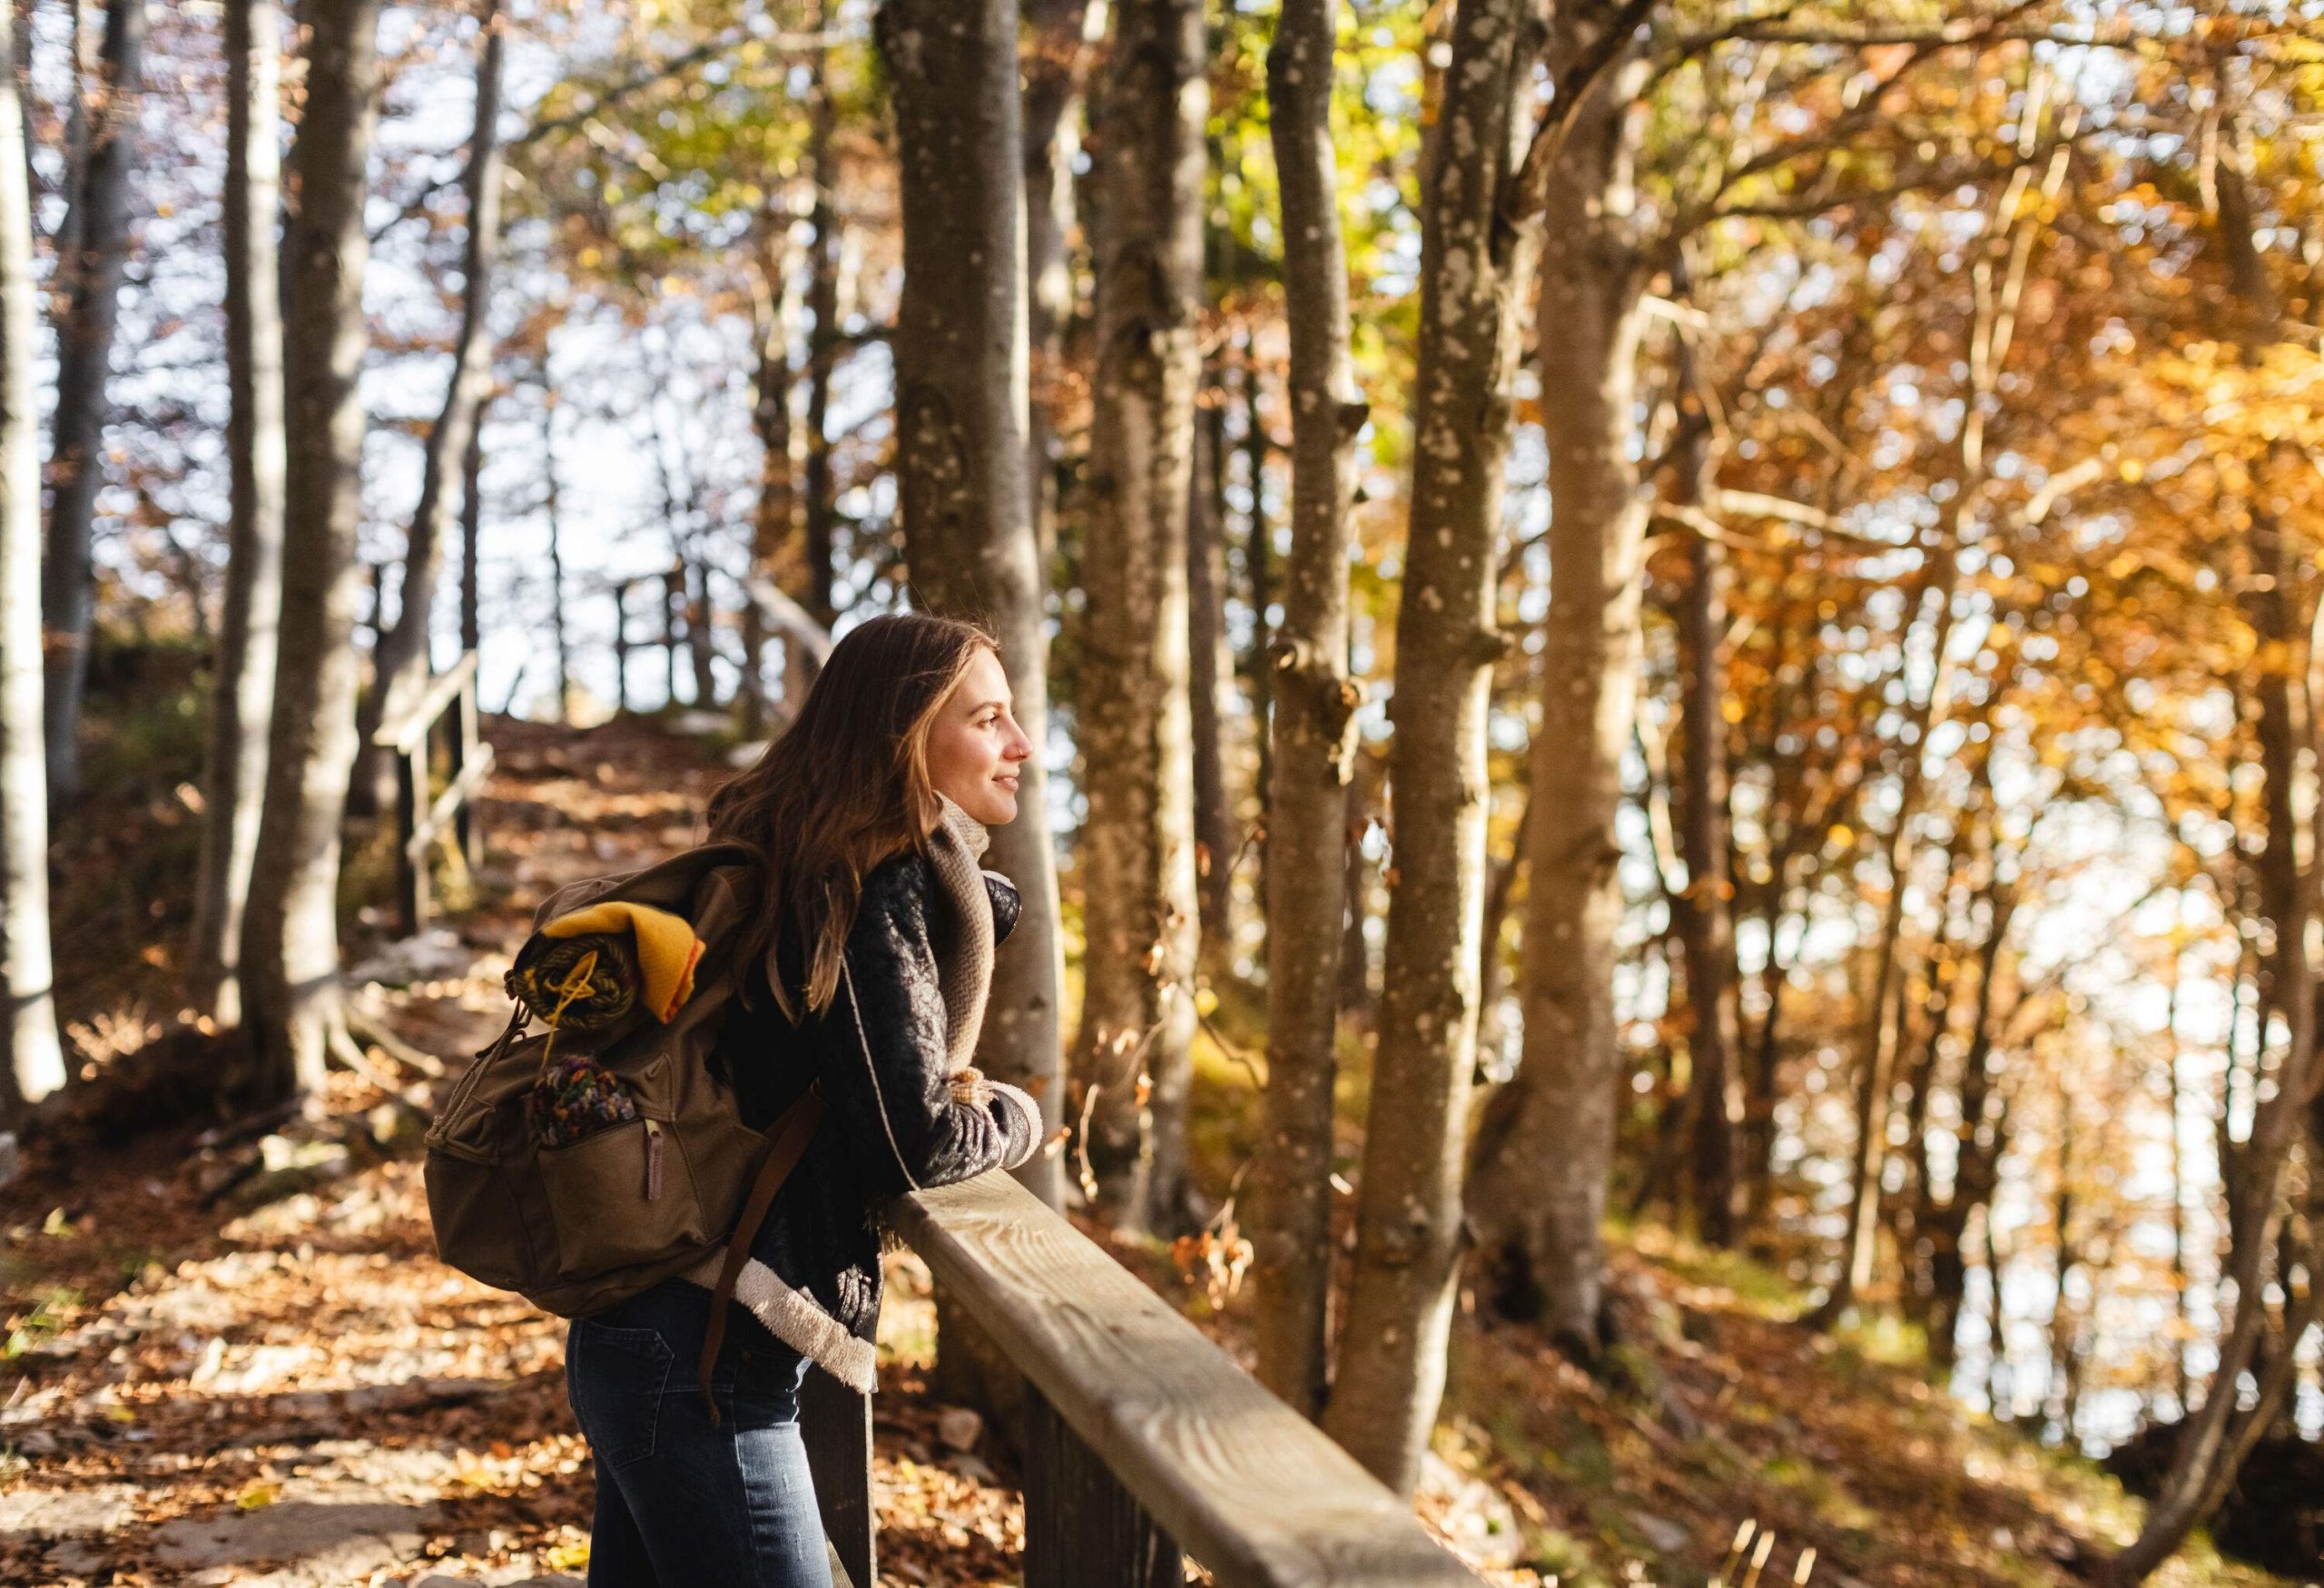 A female hiker leans on a wooden ledge and enjoys the nature views.